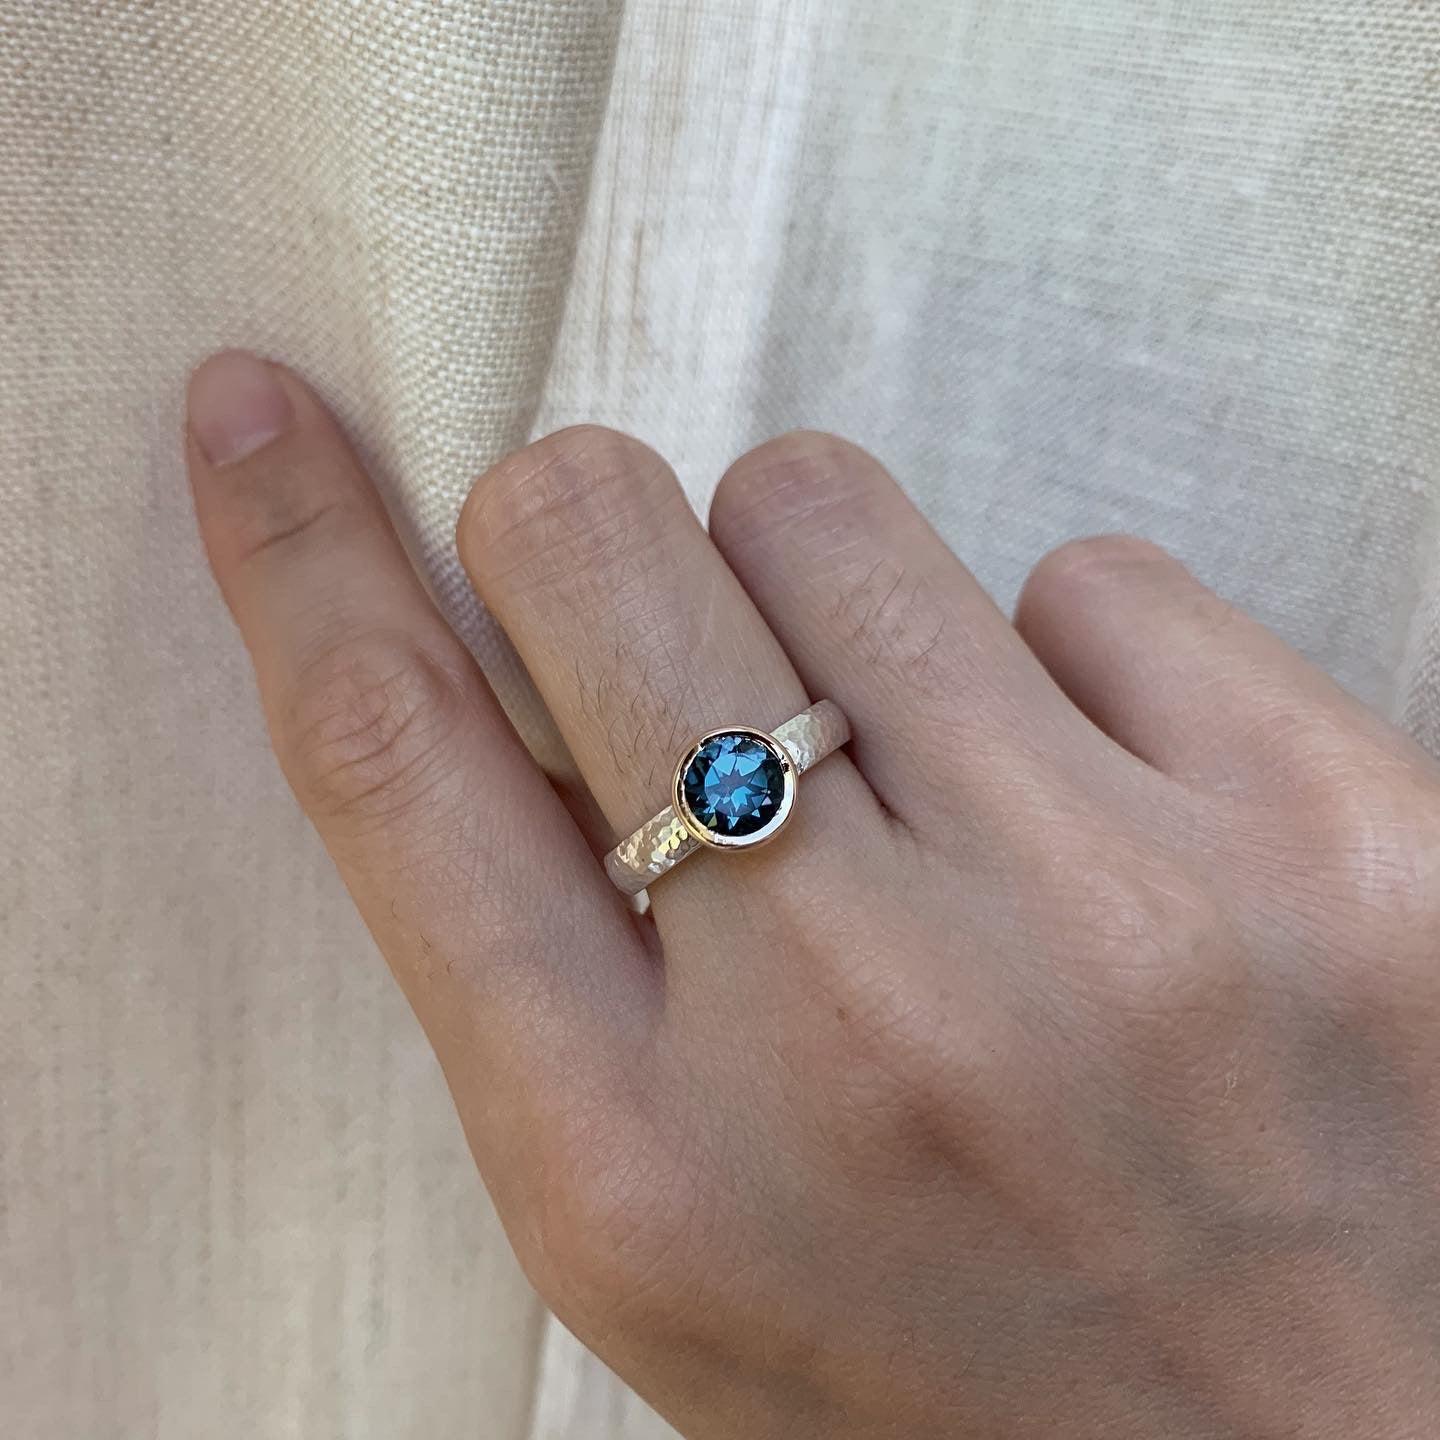 For Sale:  Two Tone Hammered Ring, London Topaz Ring, 14k Bezel Gold with Sterling Silver 3